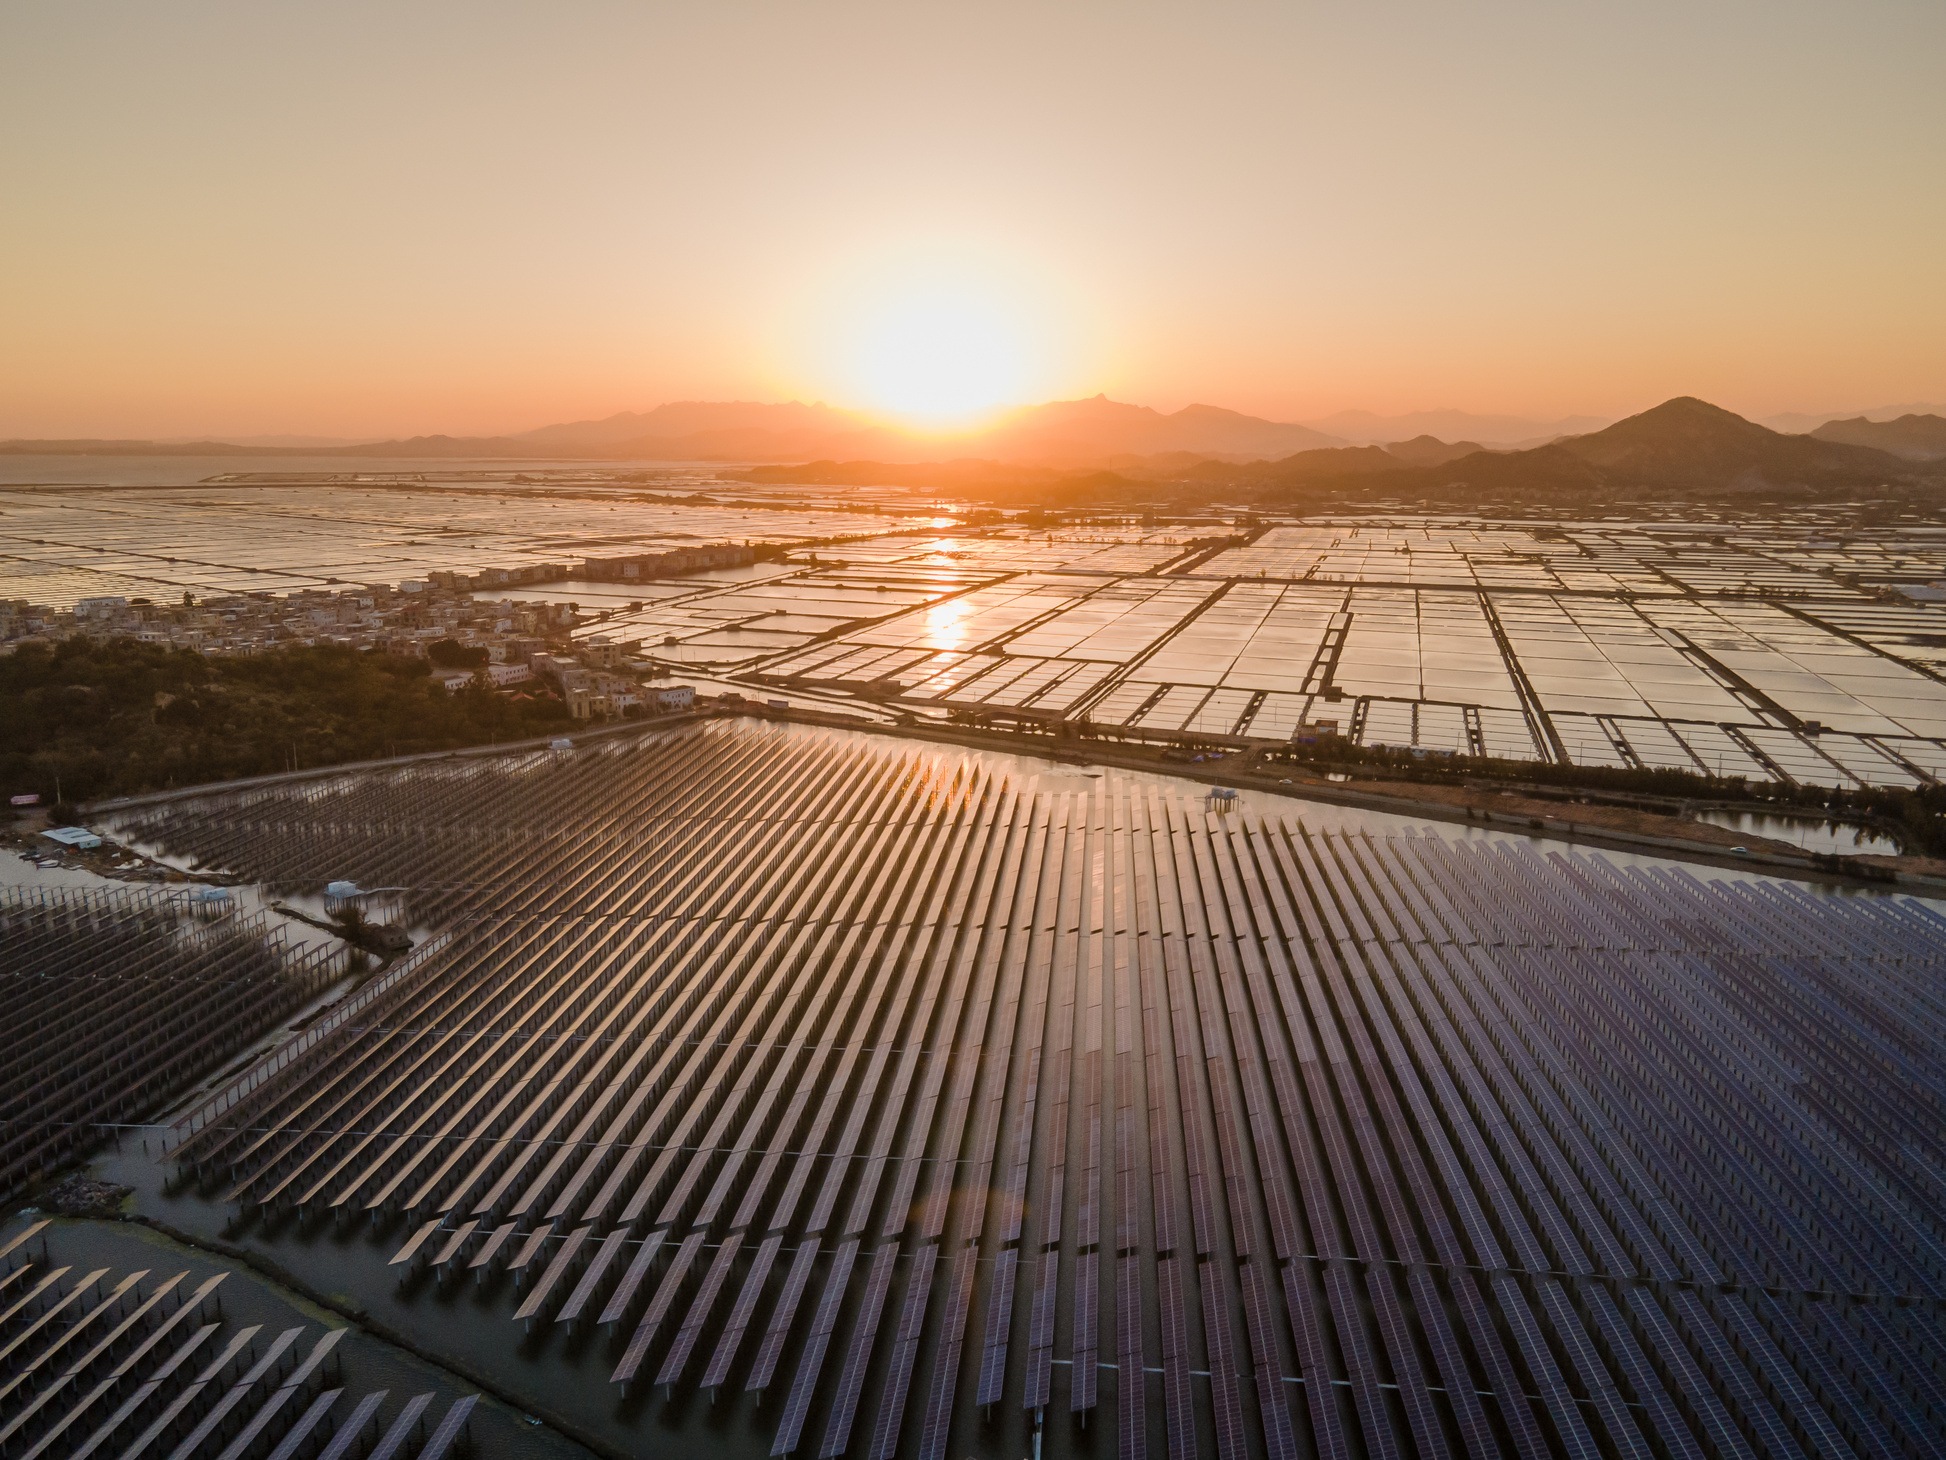 Aerial photography of the whole seaside photovoltaic solar power plant at dusk from a high altitude angle